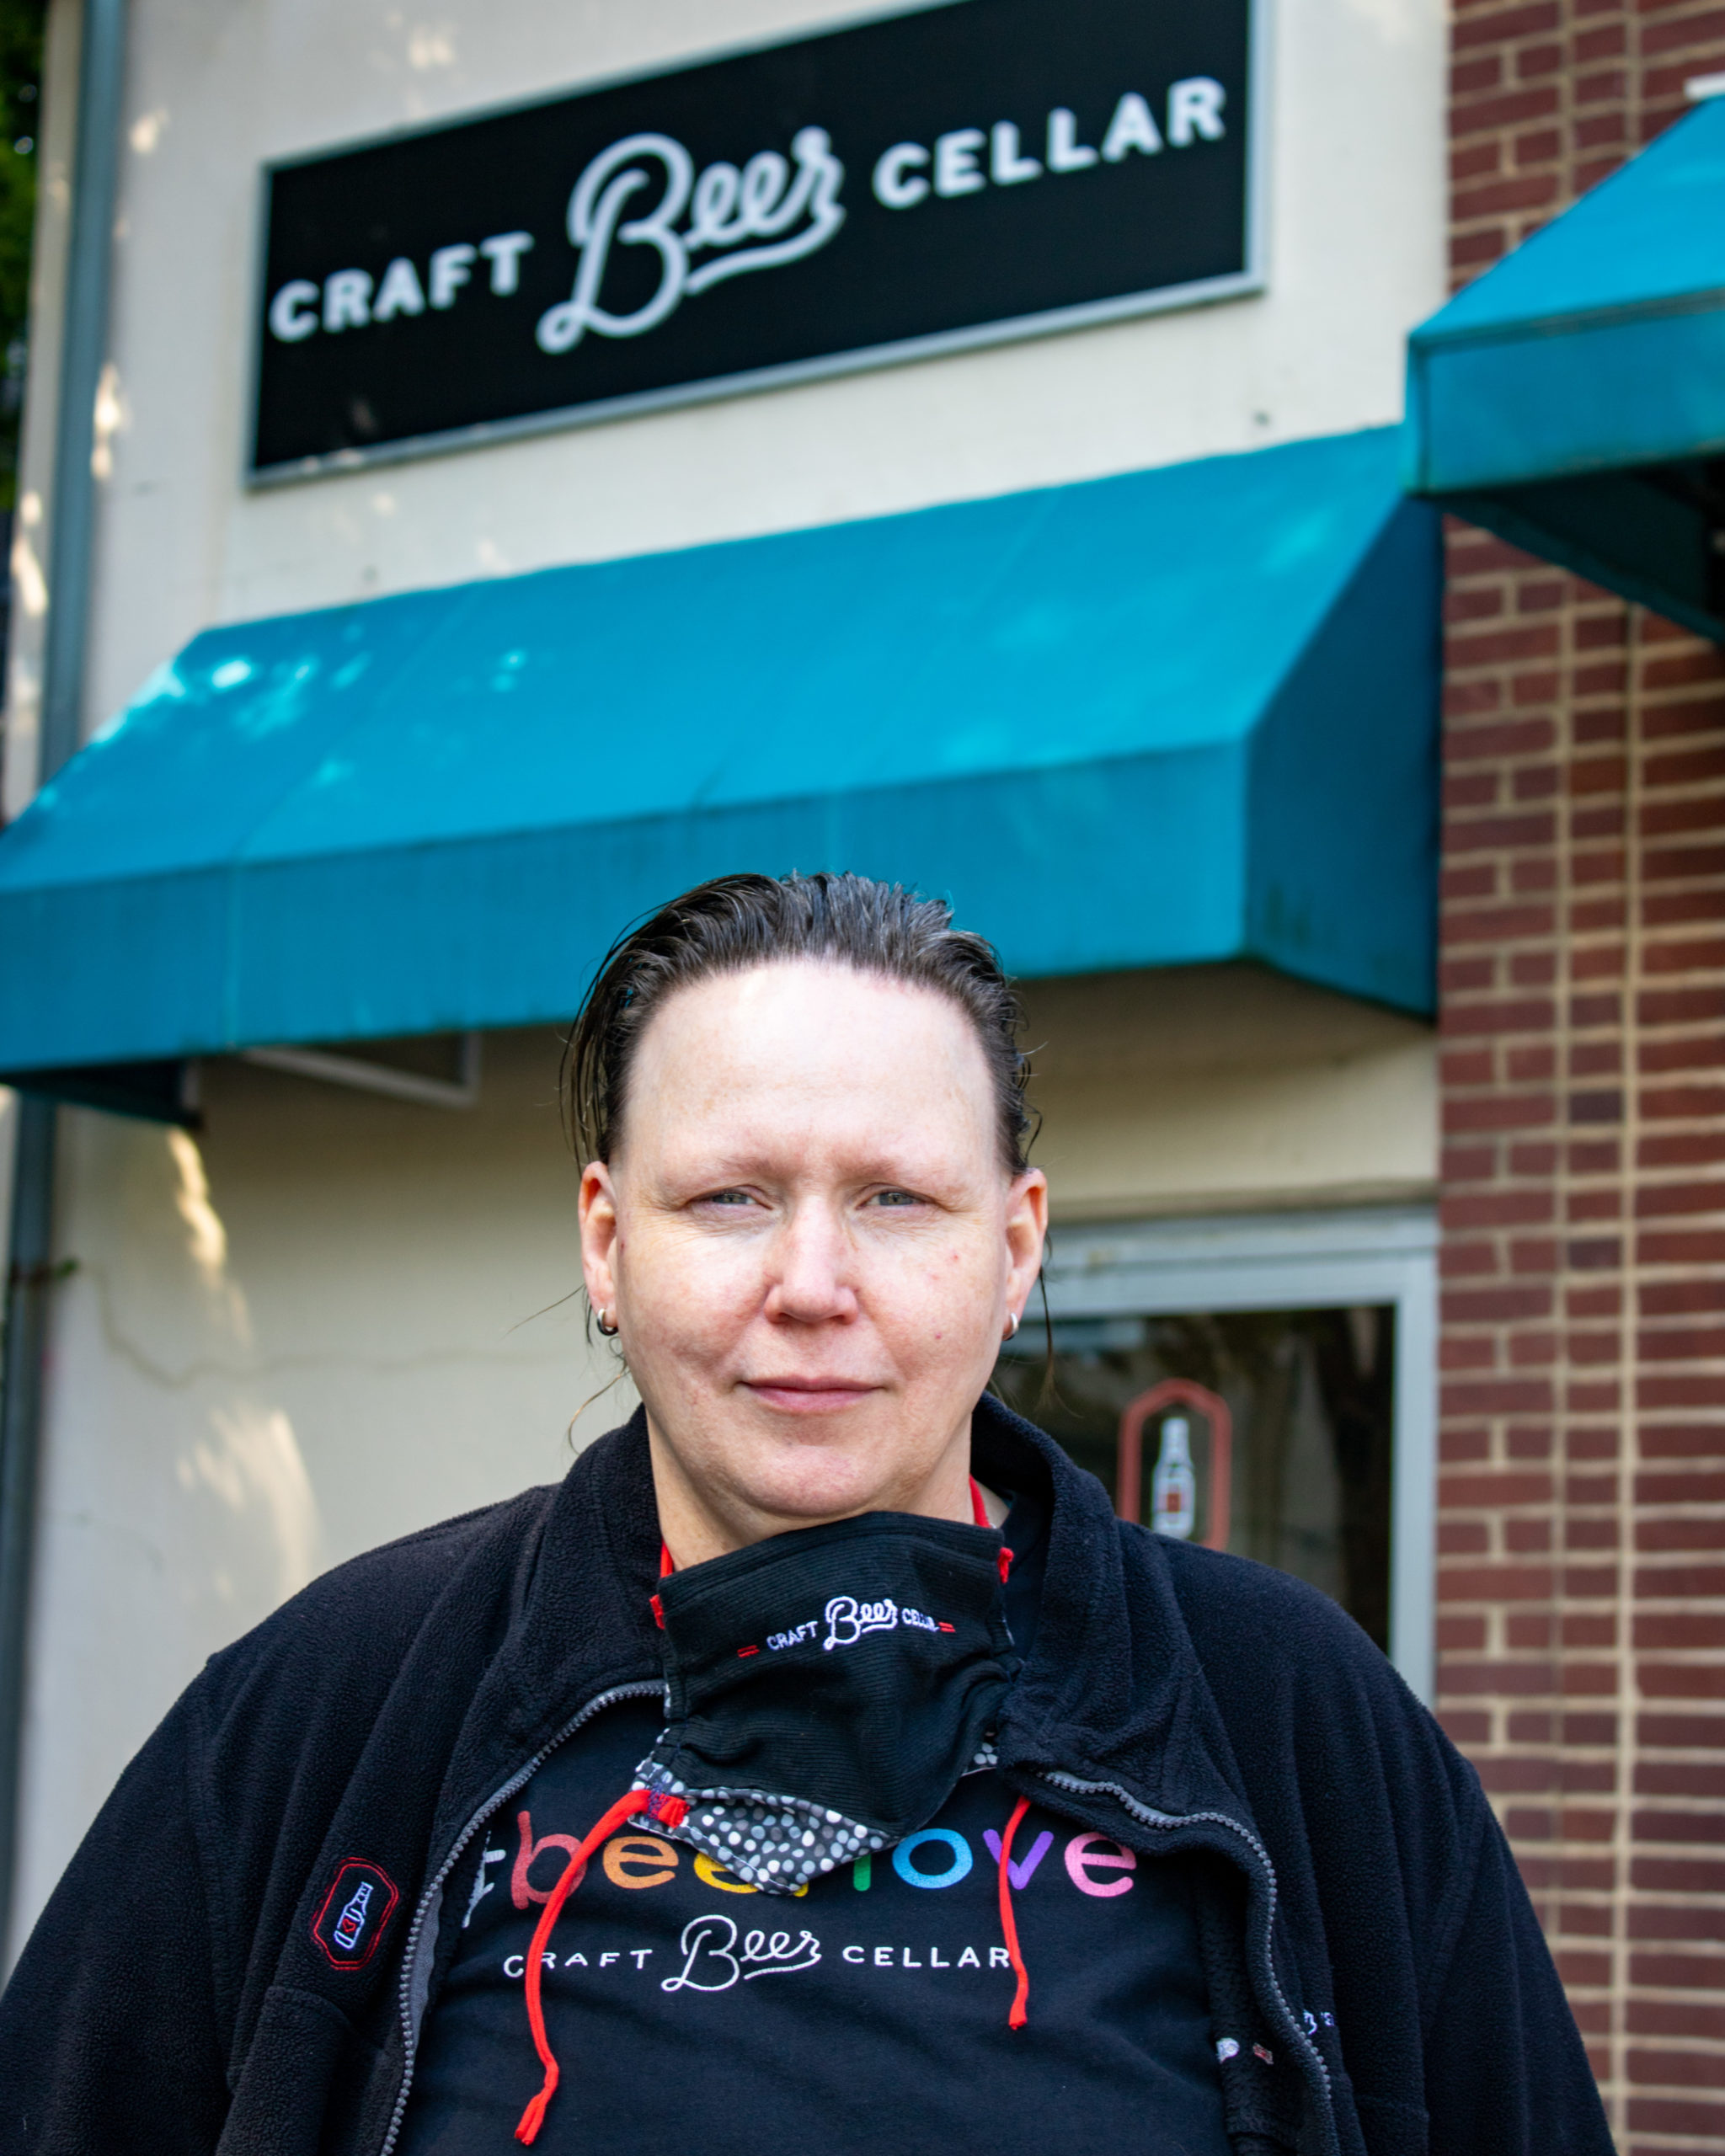 suzanne of the craft beer cellar